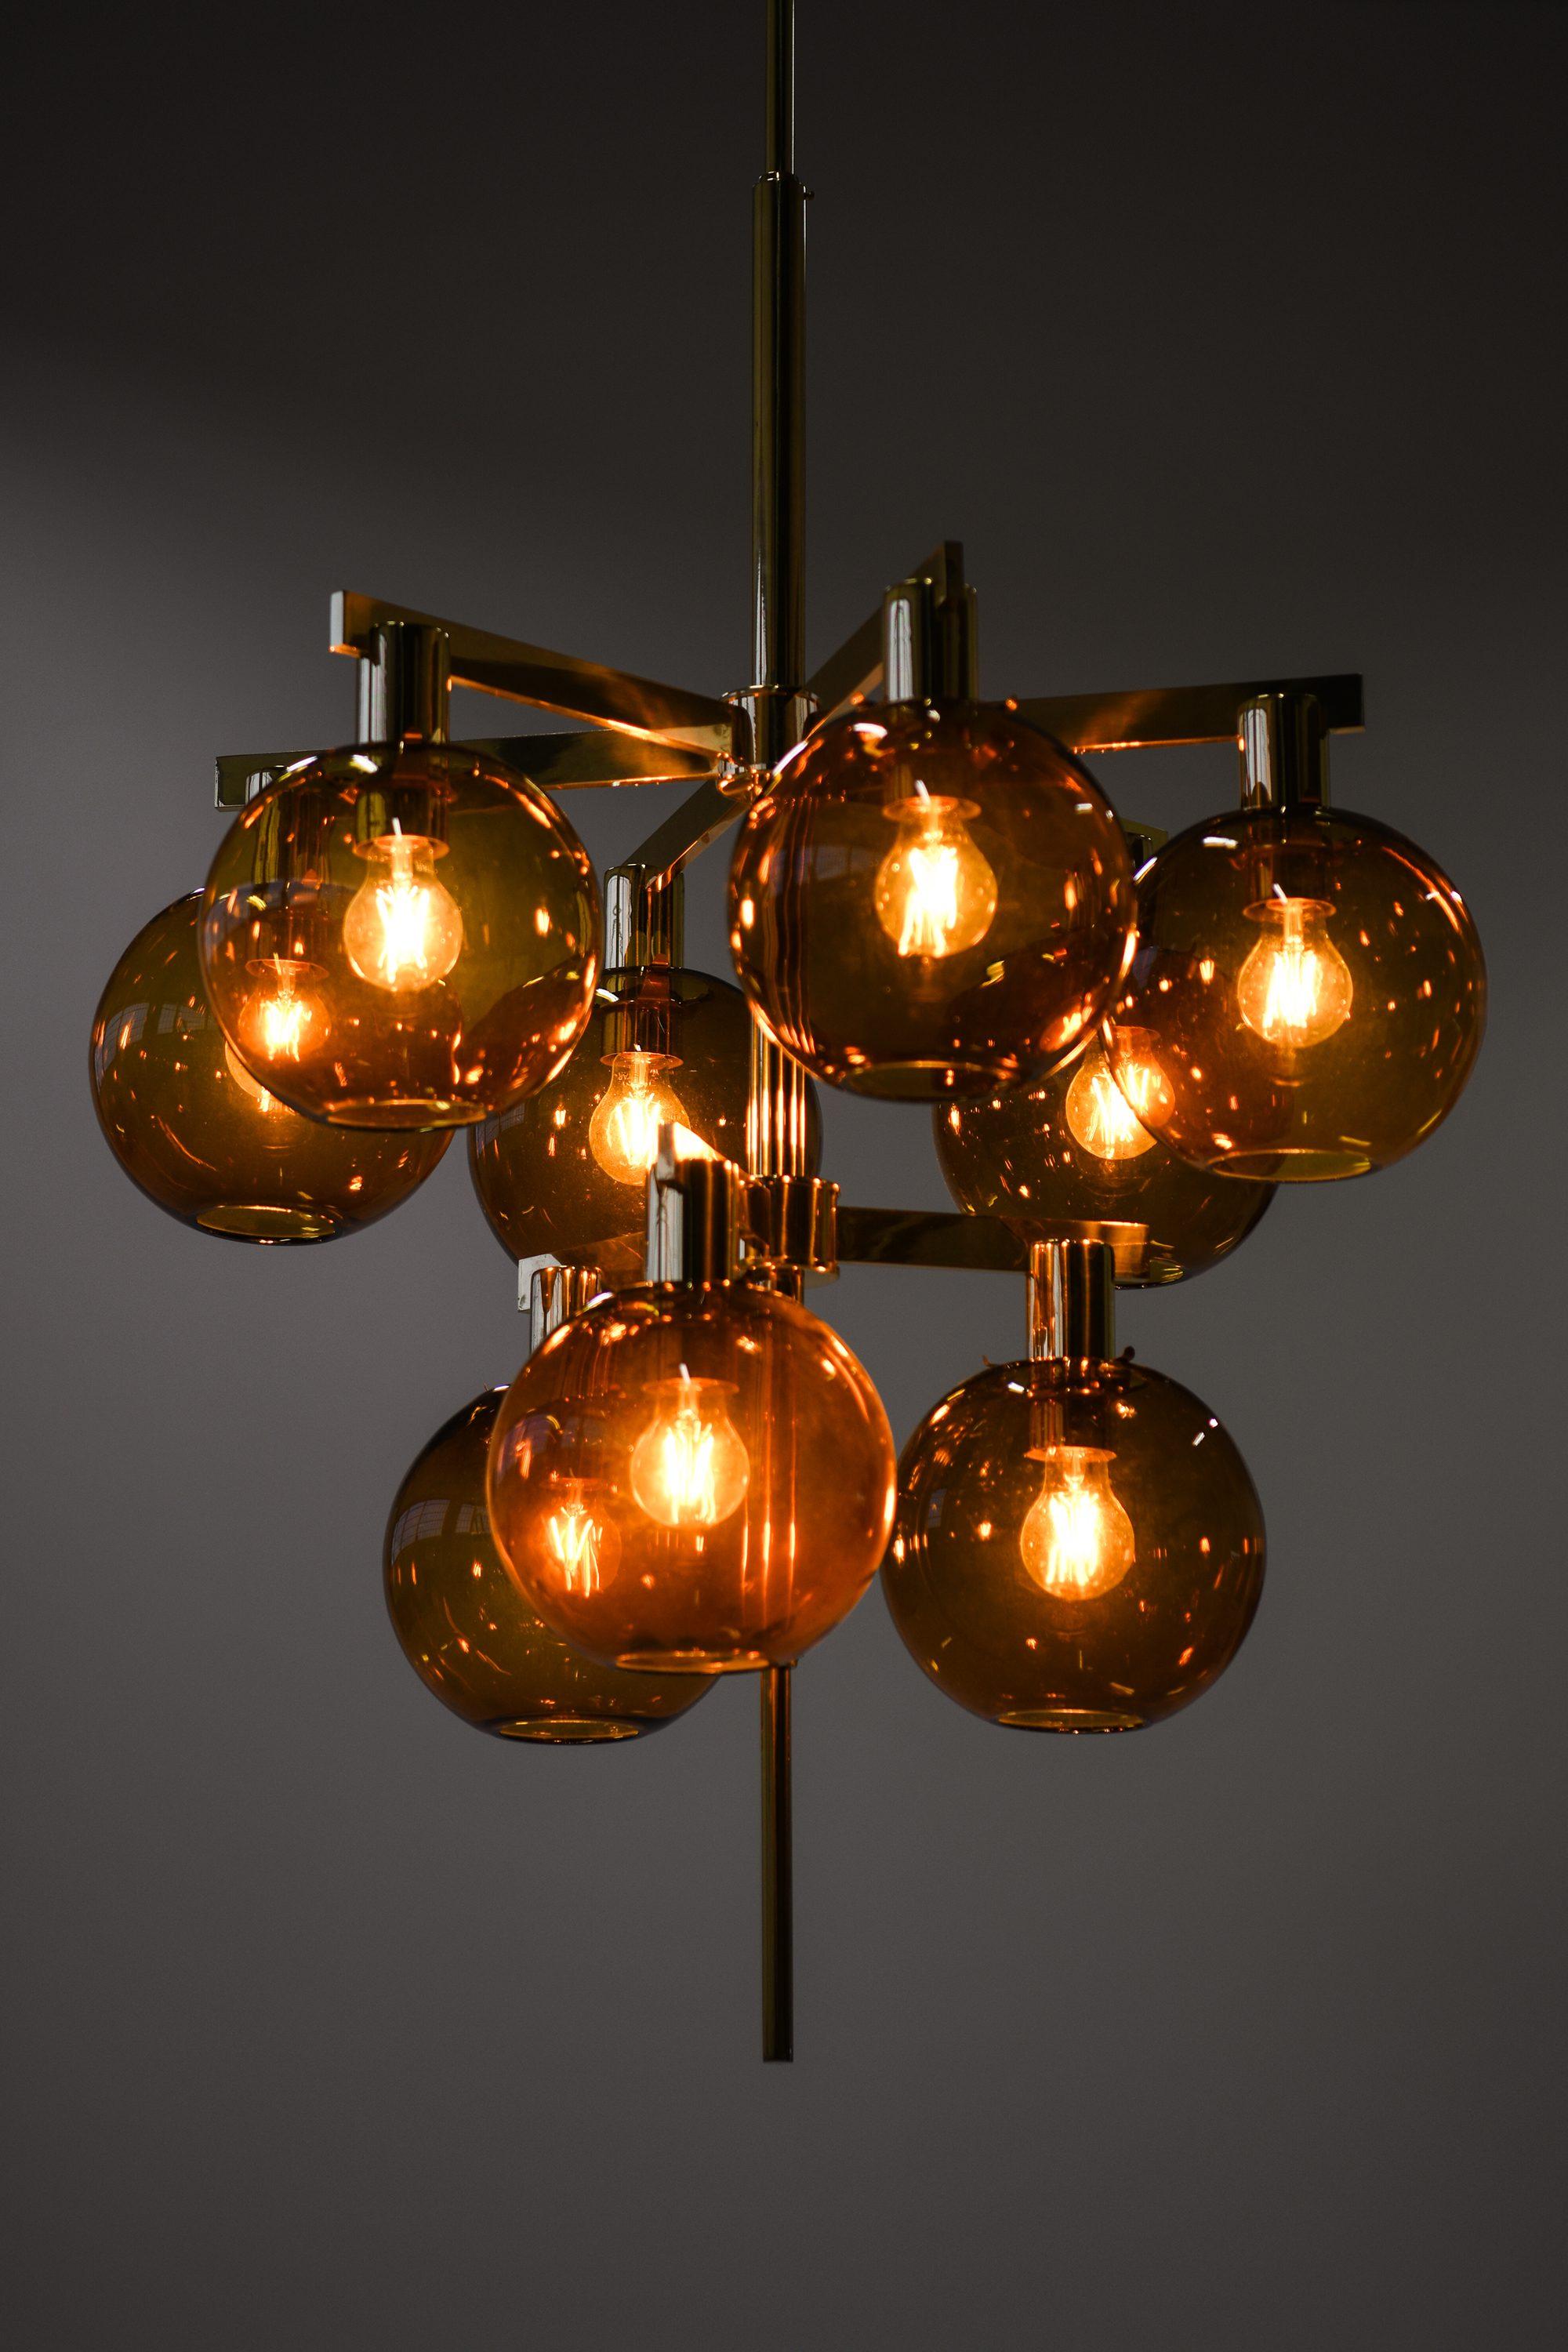 20th Century Ceiling Lamp Chandelier in Brass and Amber Glass by Hans-Agne Jakobsson, 1950's For Sale